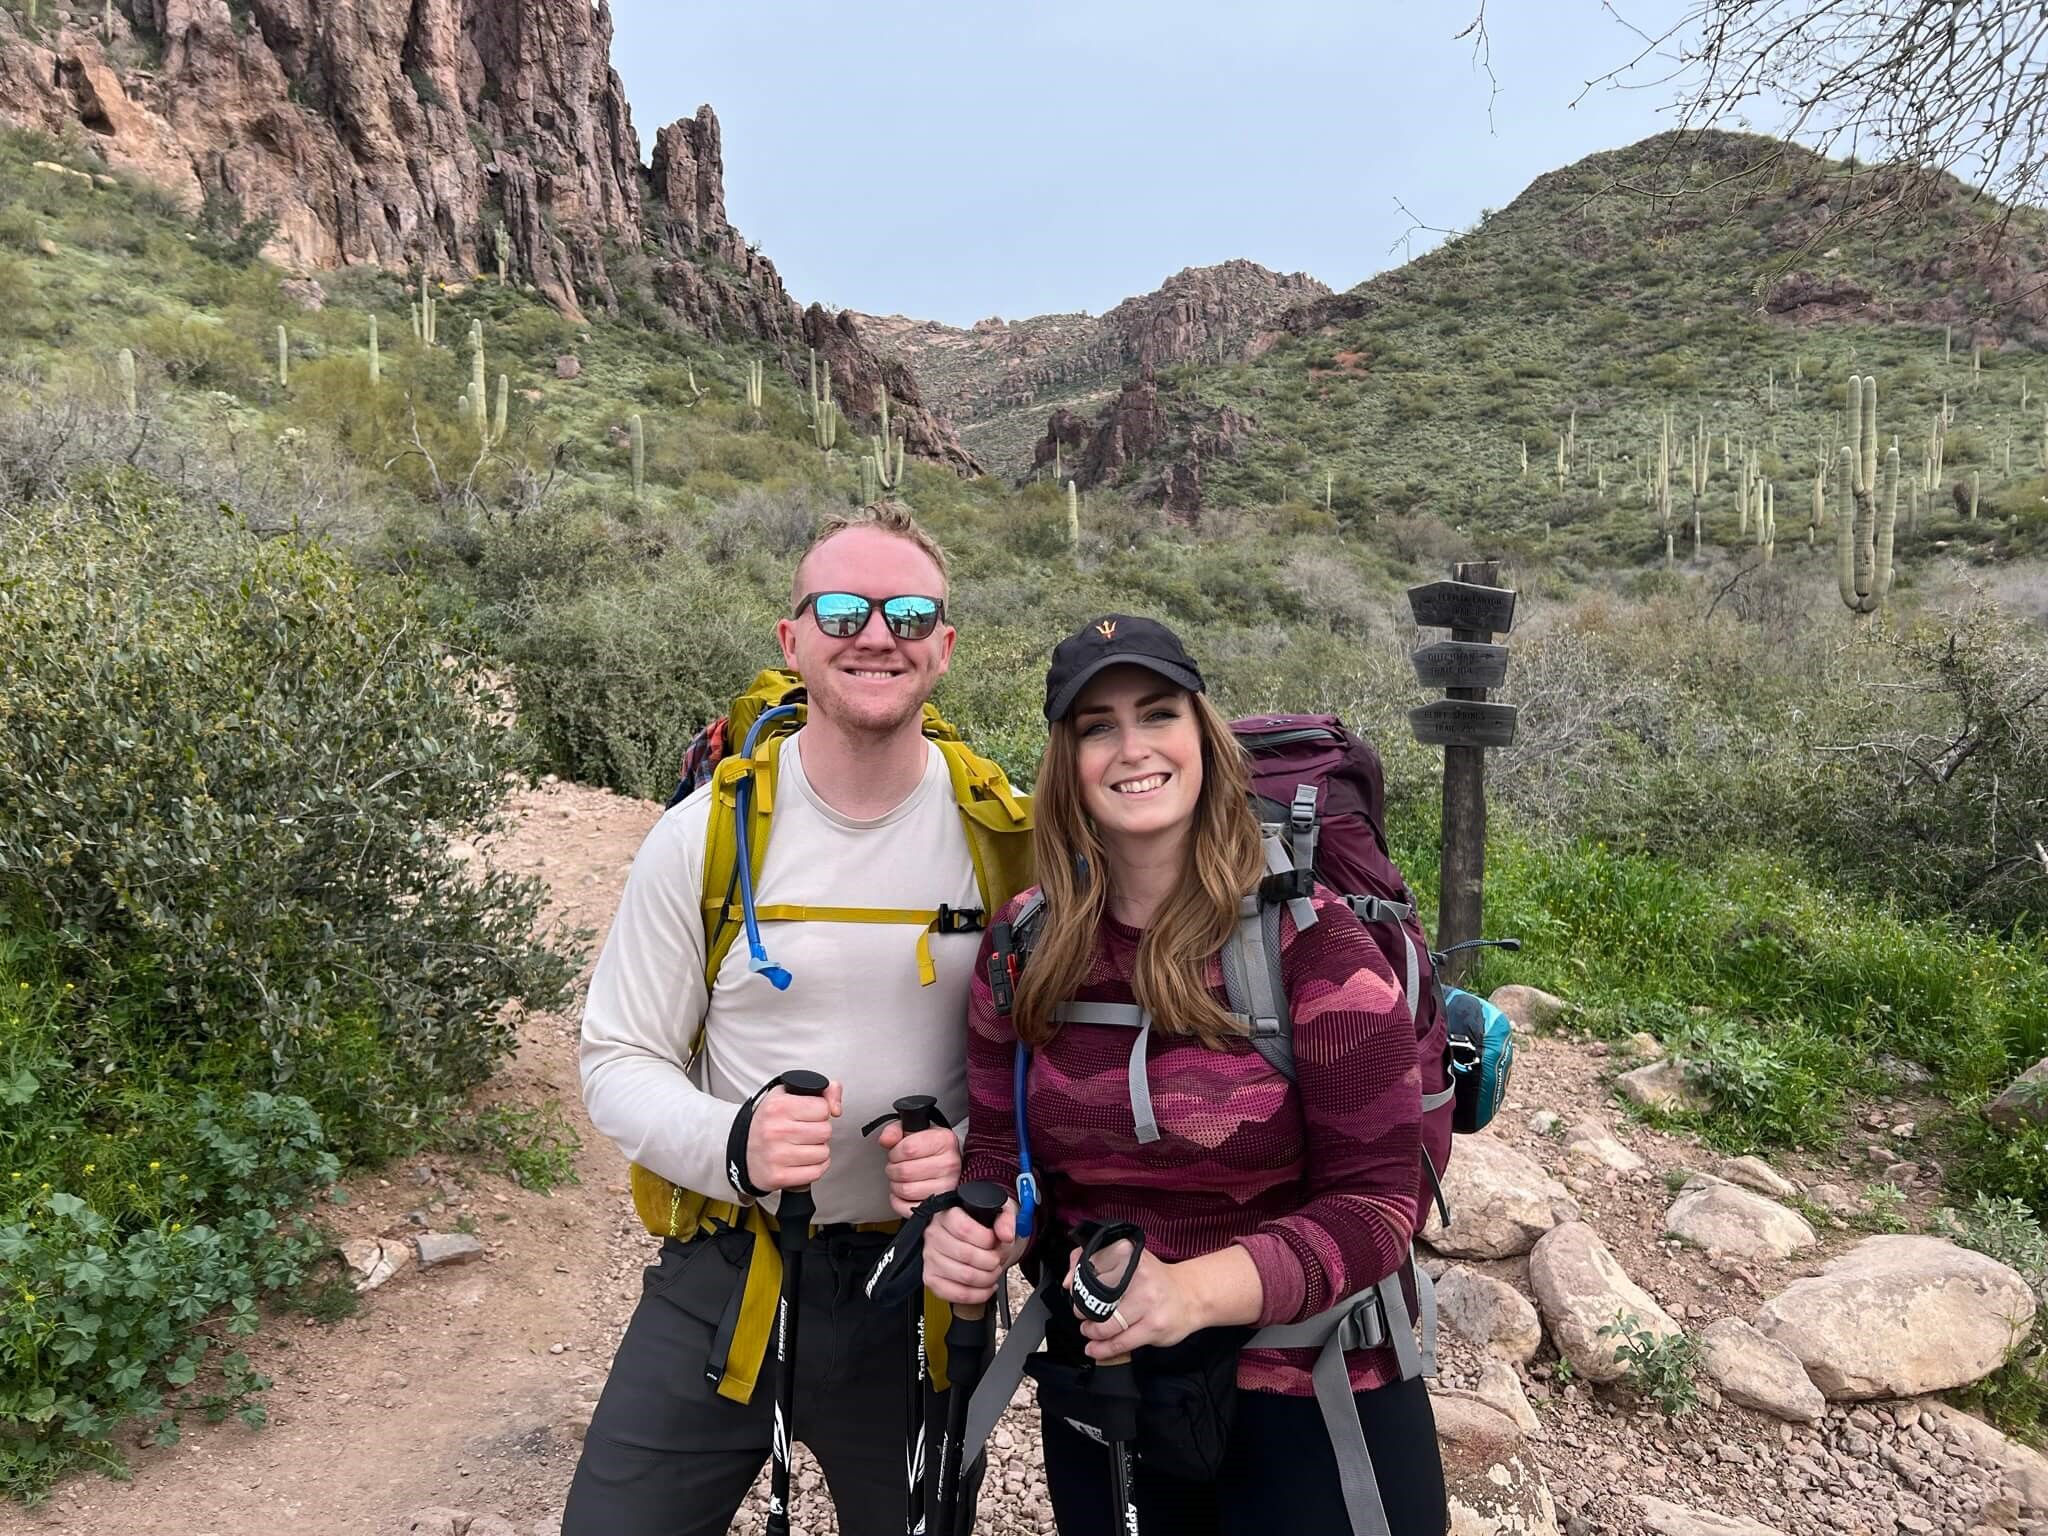 Two People with Backpacking Gear at the Start of a Trail